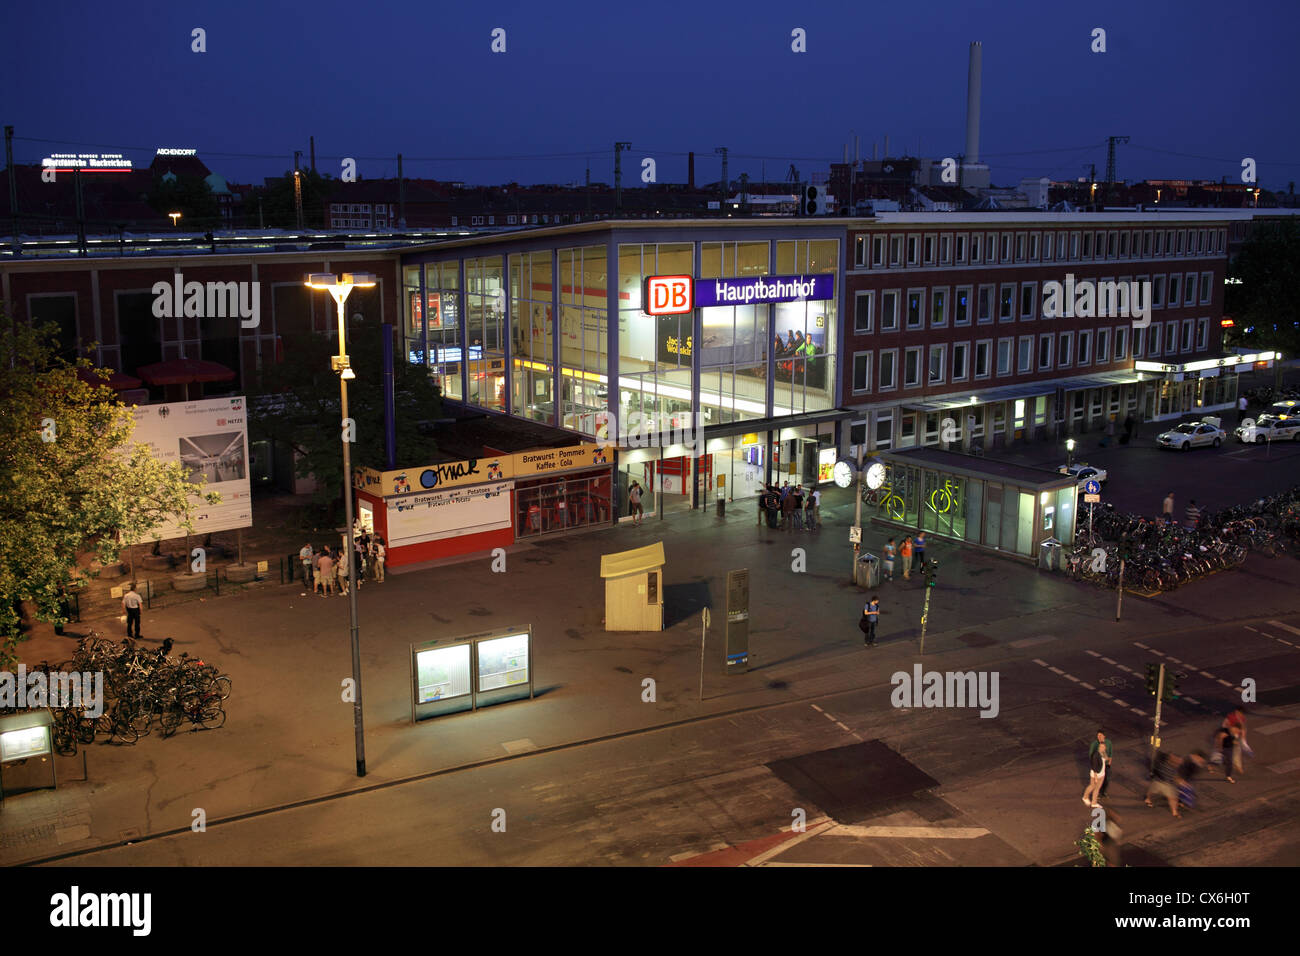 The entrance to the main railway station in Münster, Germany. At night. Stock Photo